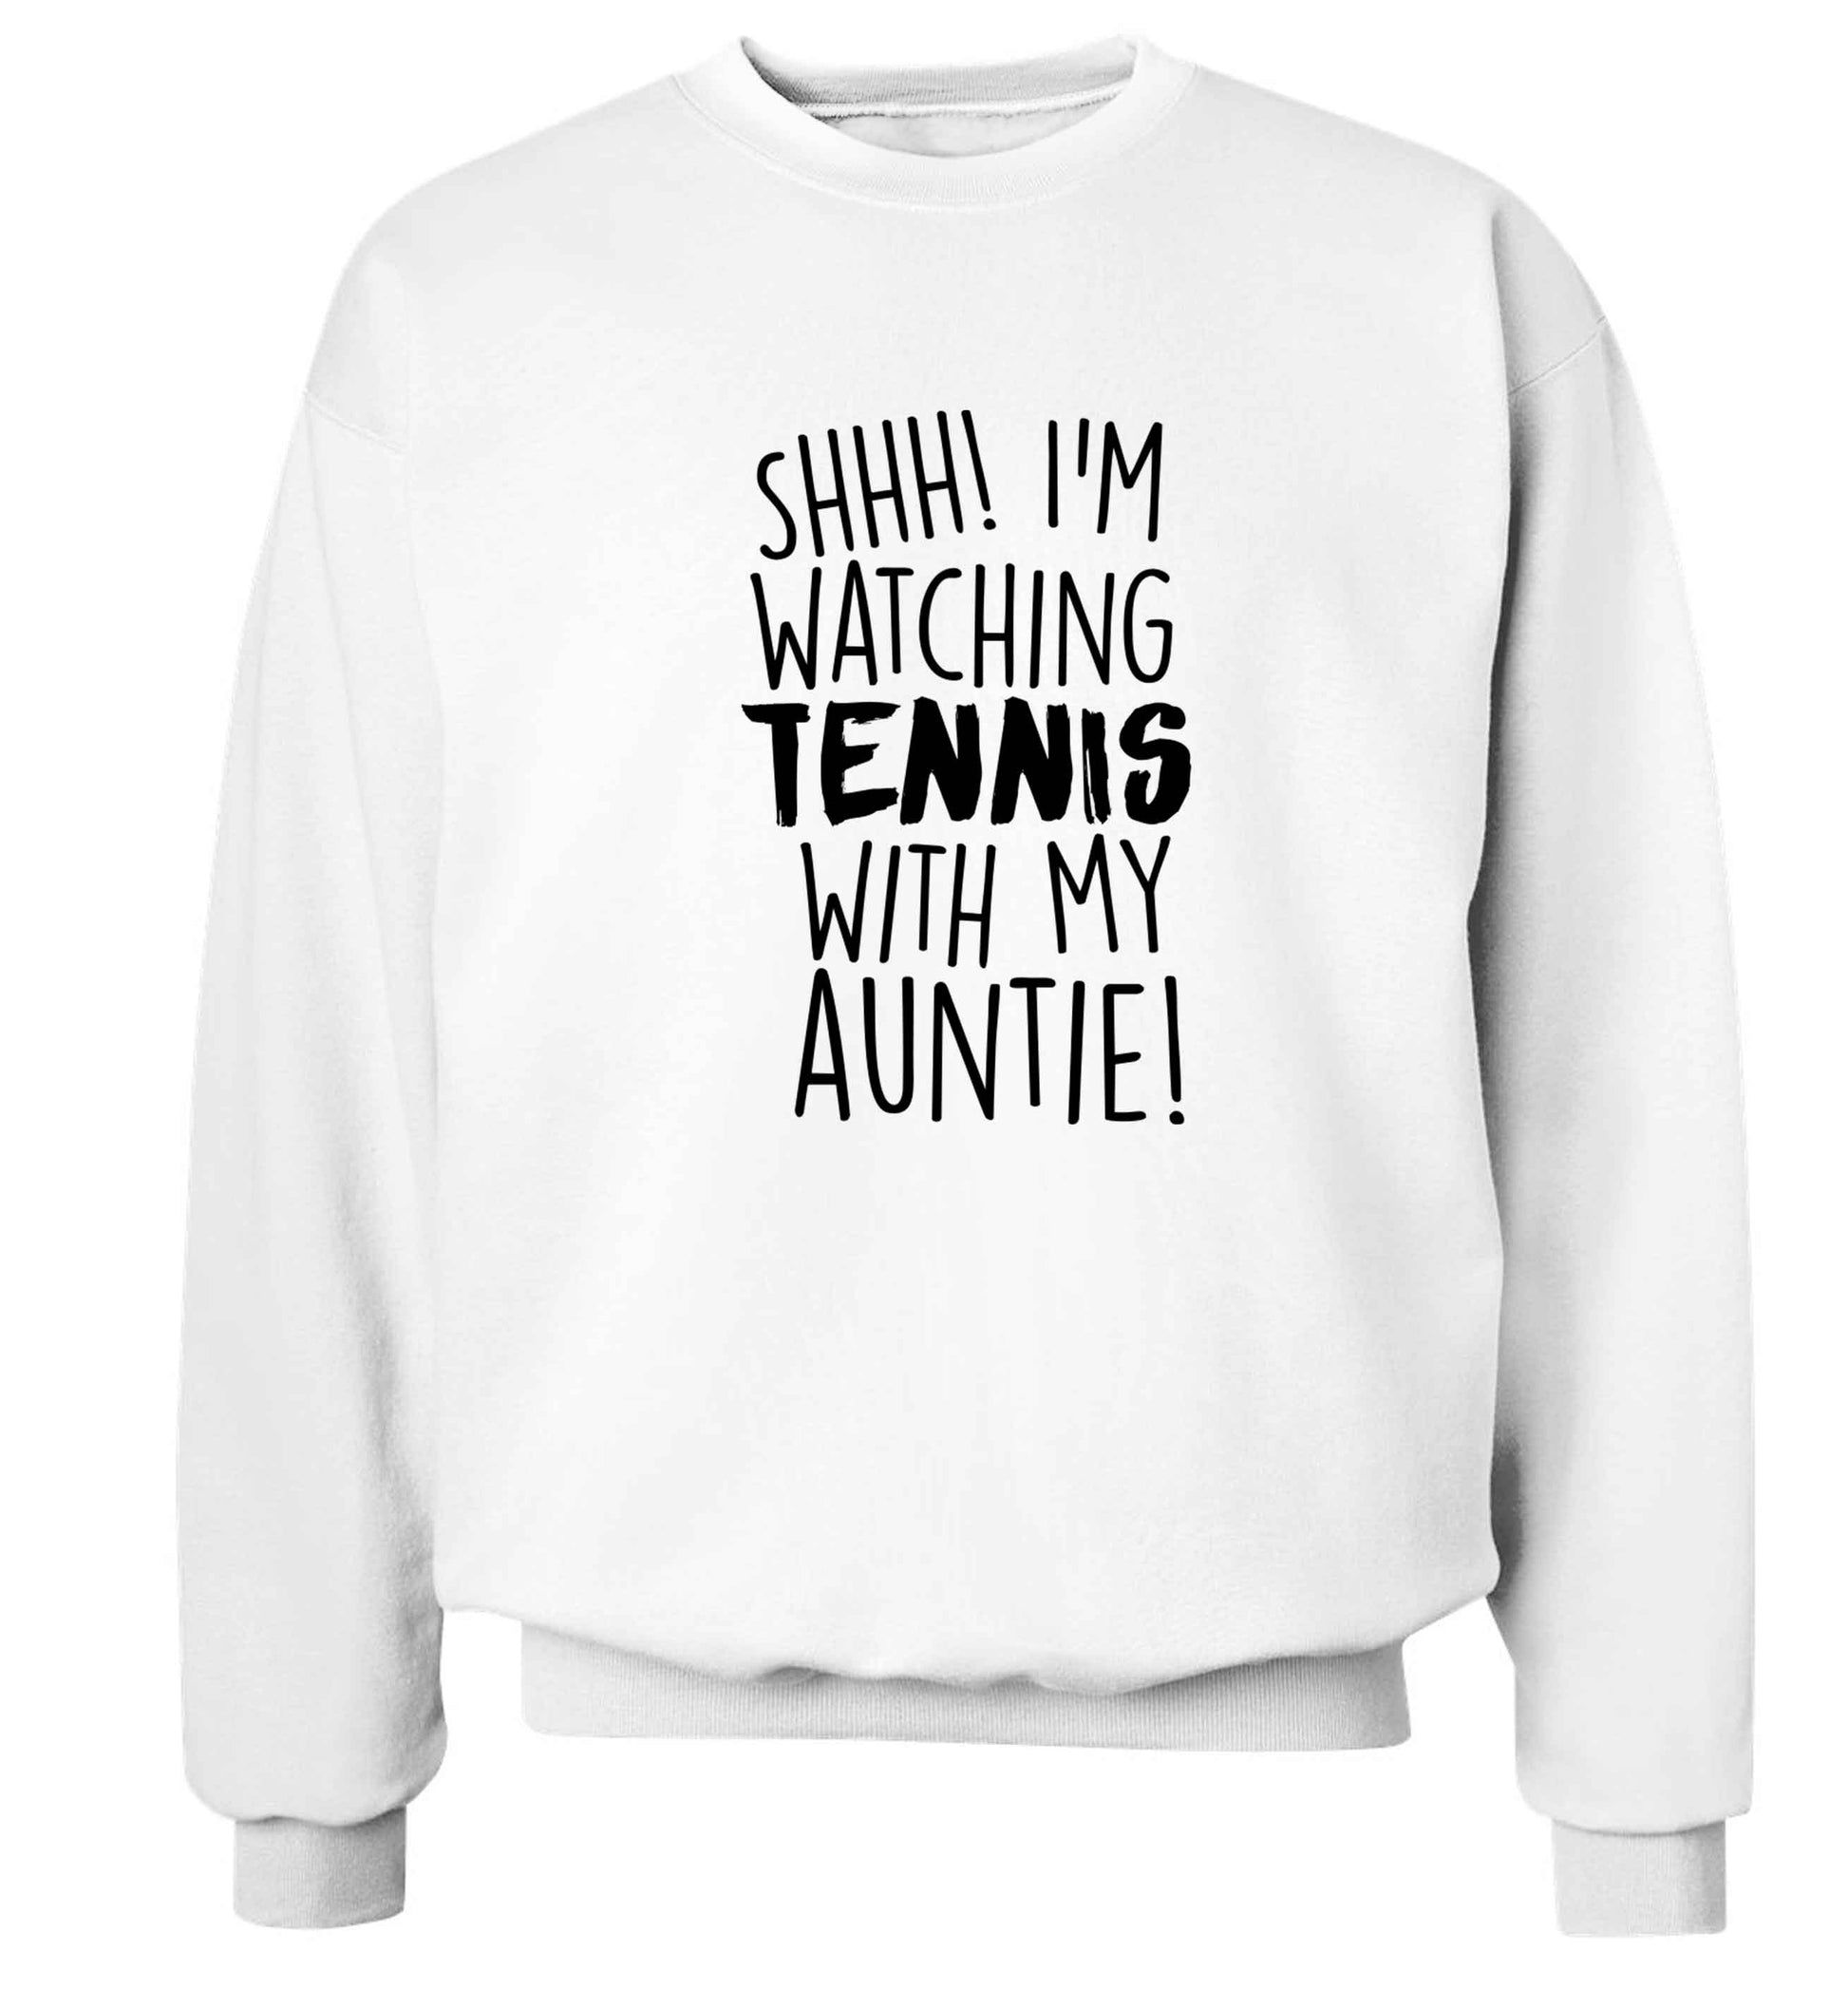 Shh! I'm watching tennis with my auntie! Adult's unisex white Sweater 2XL